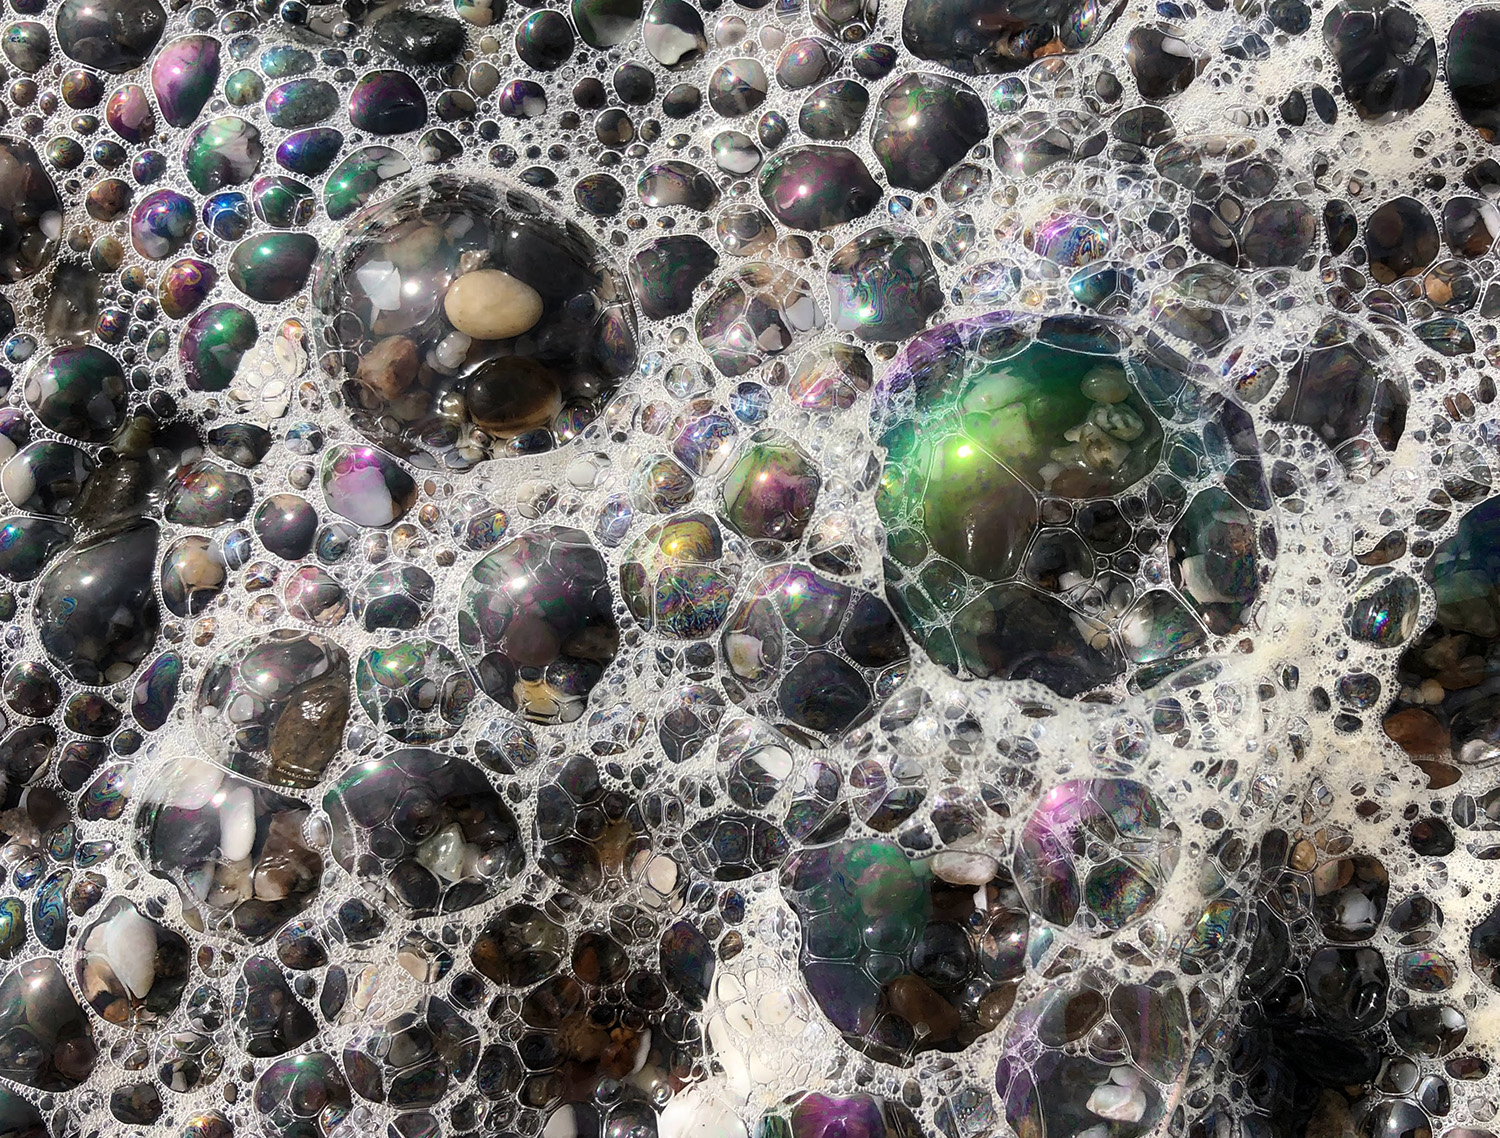 Sea foam comes in different varieties, but unless there's a harmful algal bloom around it's all most likely safe to poke. (Photo by Guananí Gómez-Van Cortright)